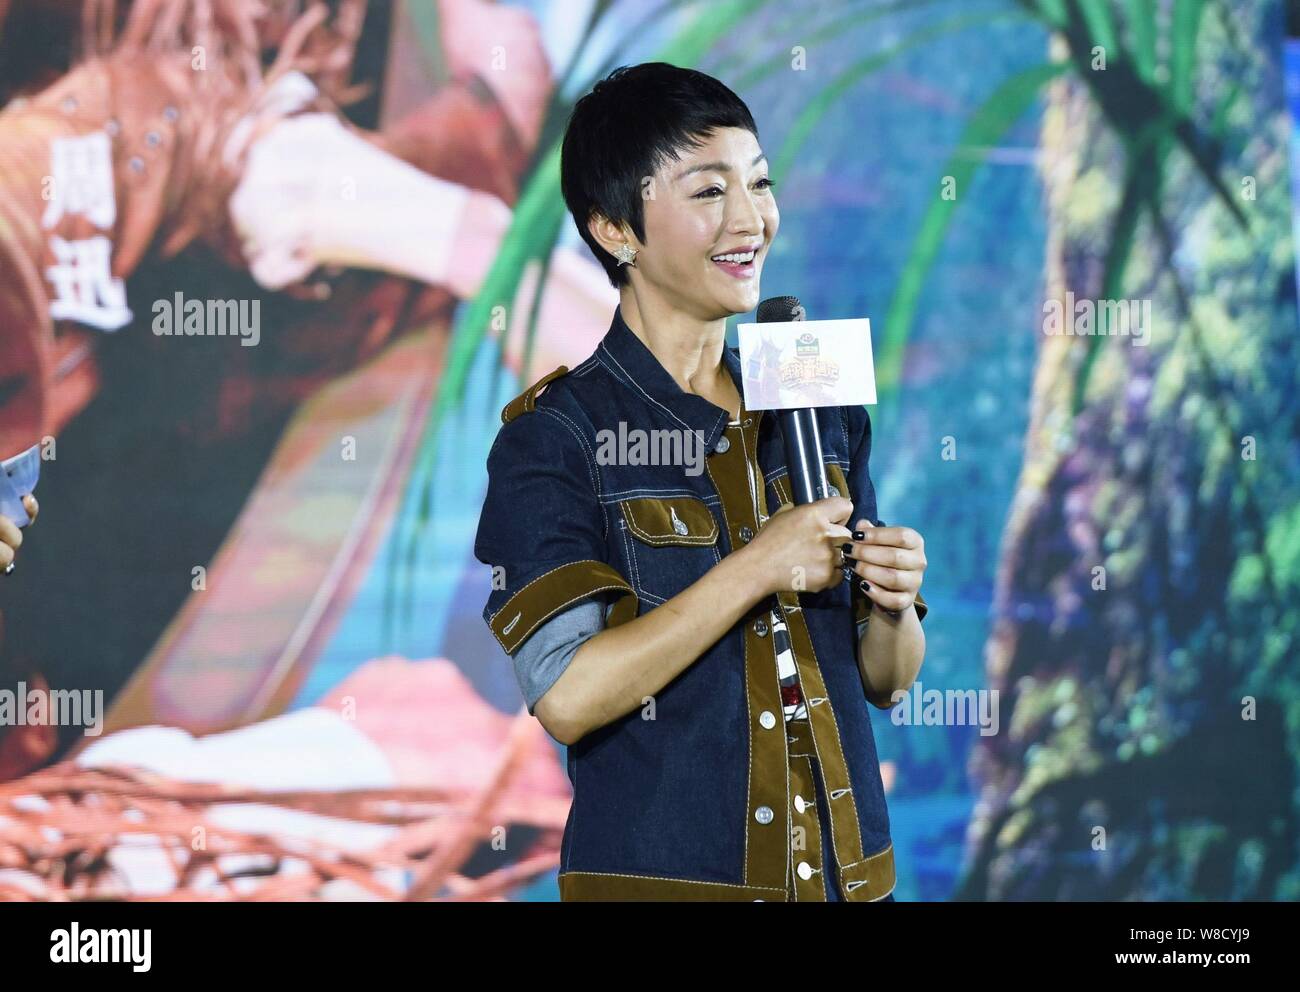 Chinese actress Zhou Xun speaks at a press conference for the film "On the way" in Hangzhou, east China's Zhejiang province, 10 December 2015. Stock Photo